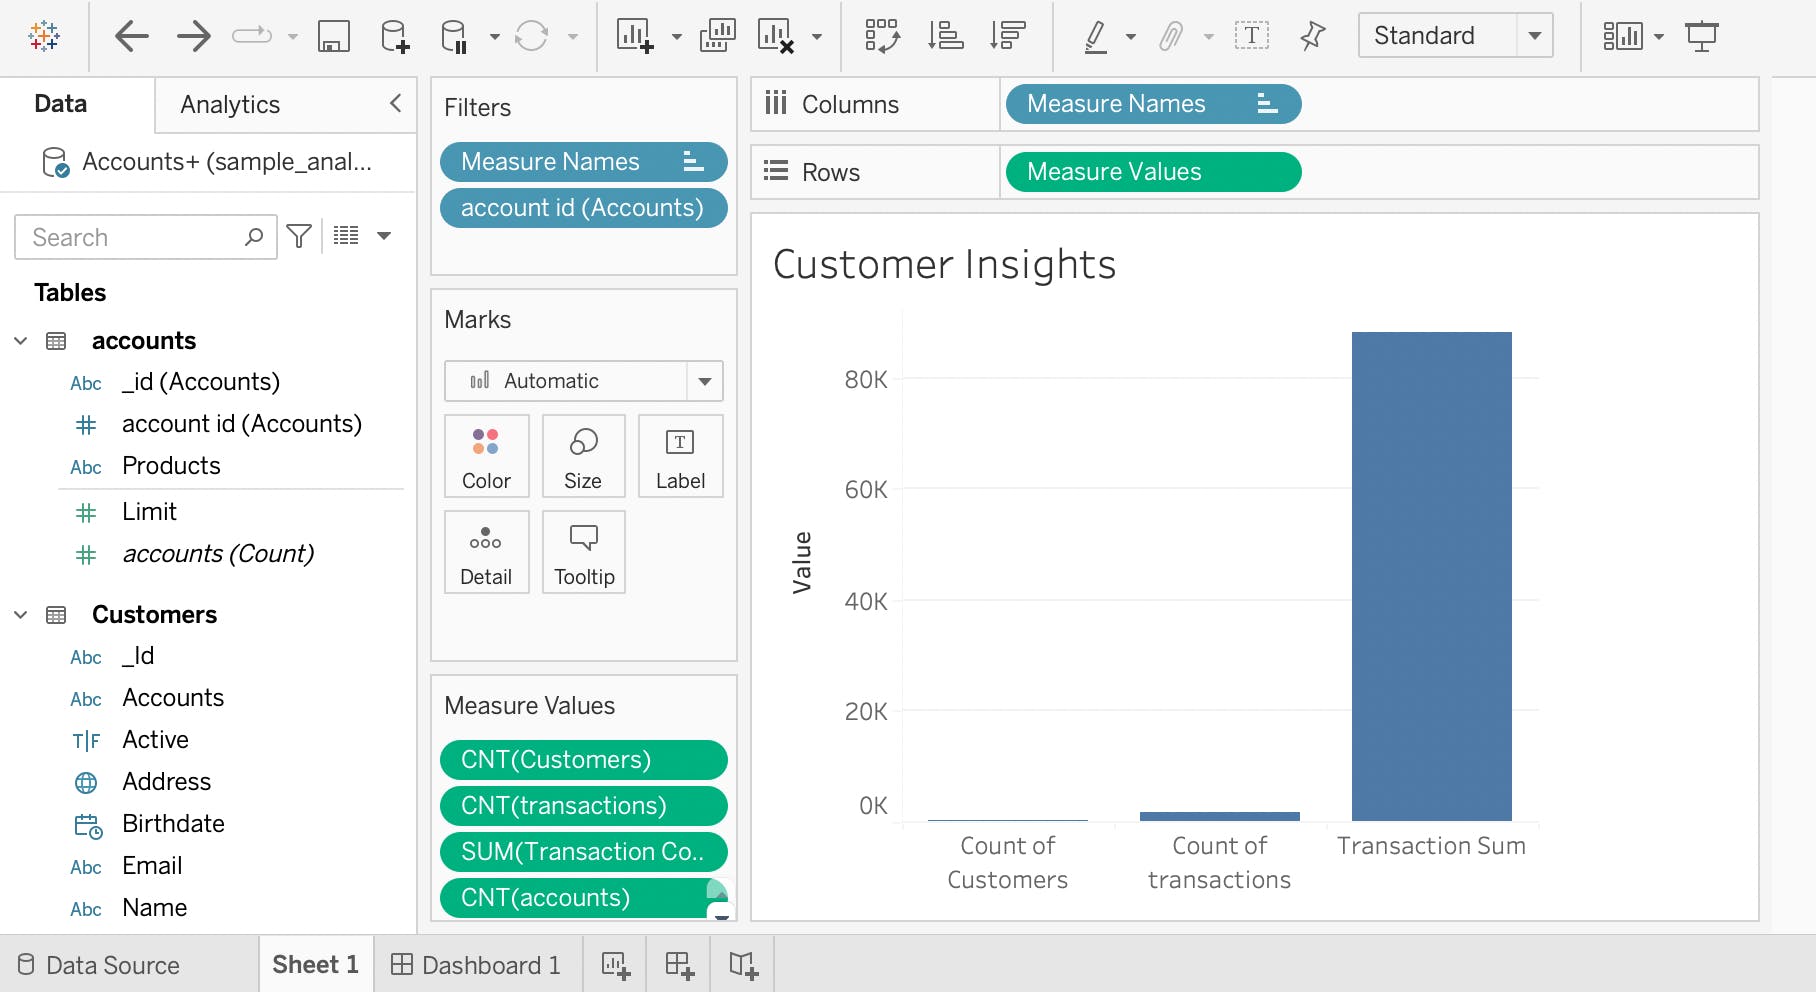 Tableau worksheet with insights on customers, transactions, and a total sum of transactions.